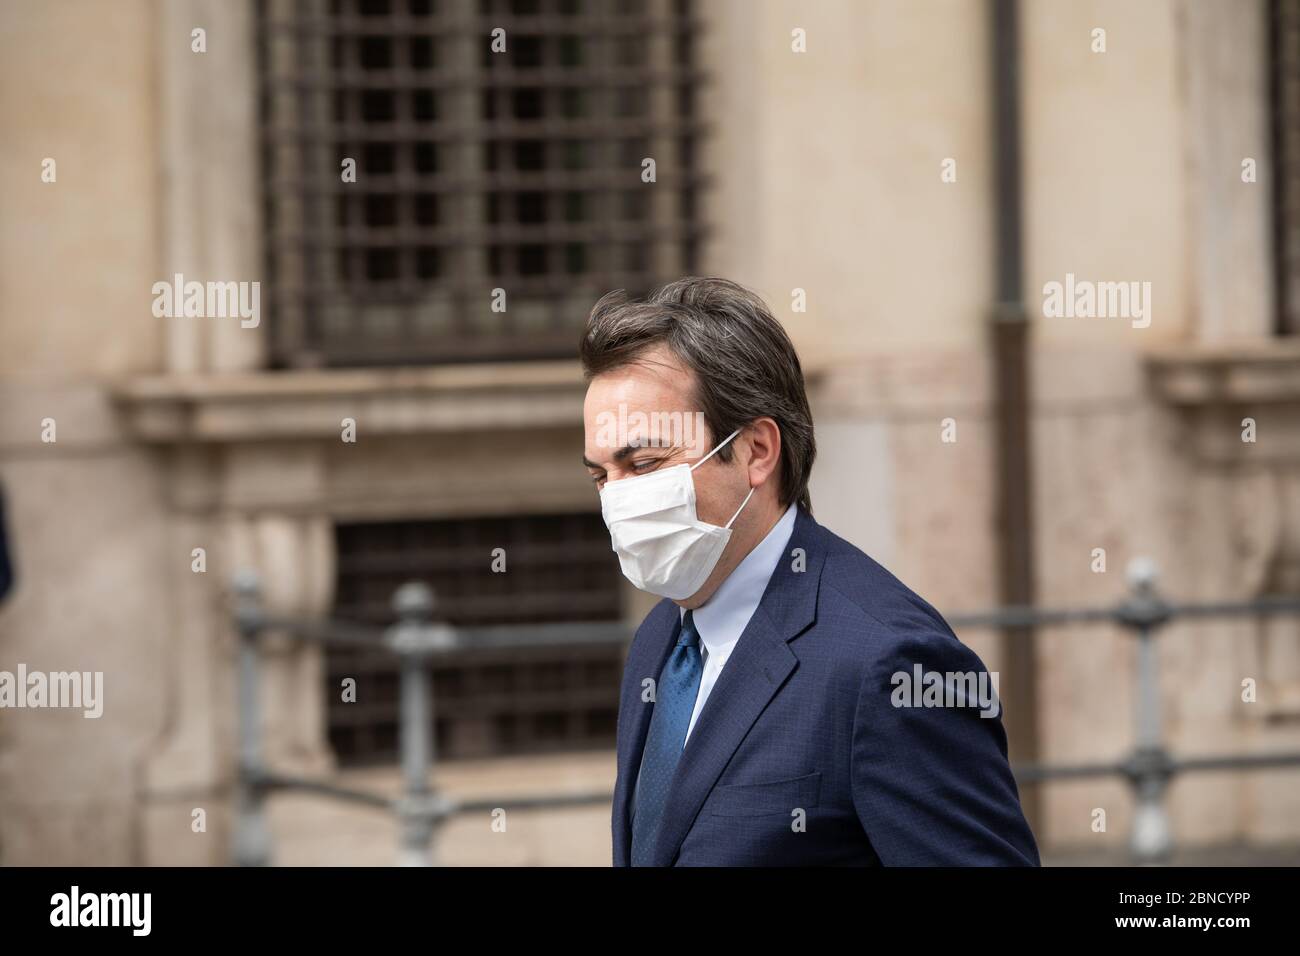 May 13, 2020, Rome, Italy: Italian Minister for European Affairs, Vincenzo Amendola, enters Palazzo Chigi before the Council of Ministers while wearing a face mask as a precaution against the spread of corona virus. (Credit Image: © Cosimo Martemucci/SOPA Images via ZUMA Wire) Stock Photo